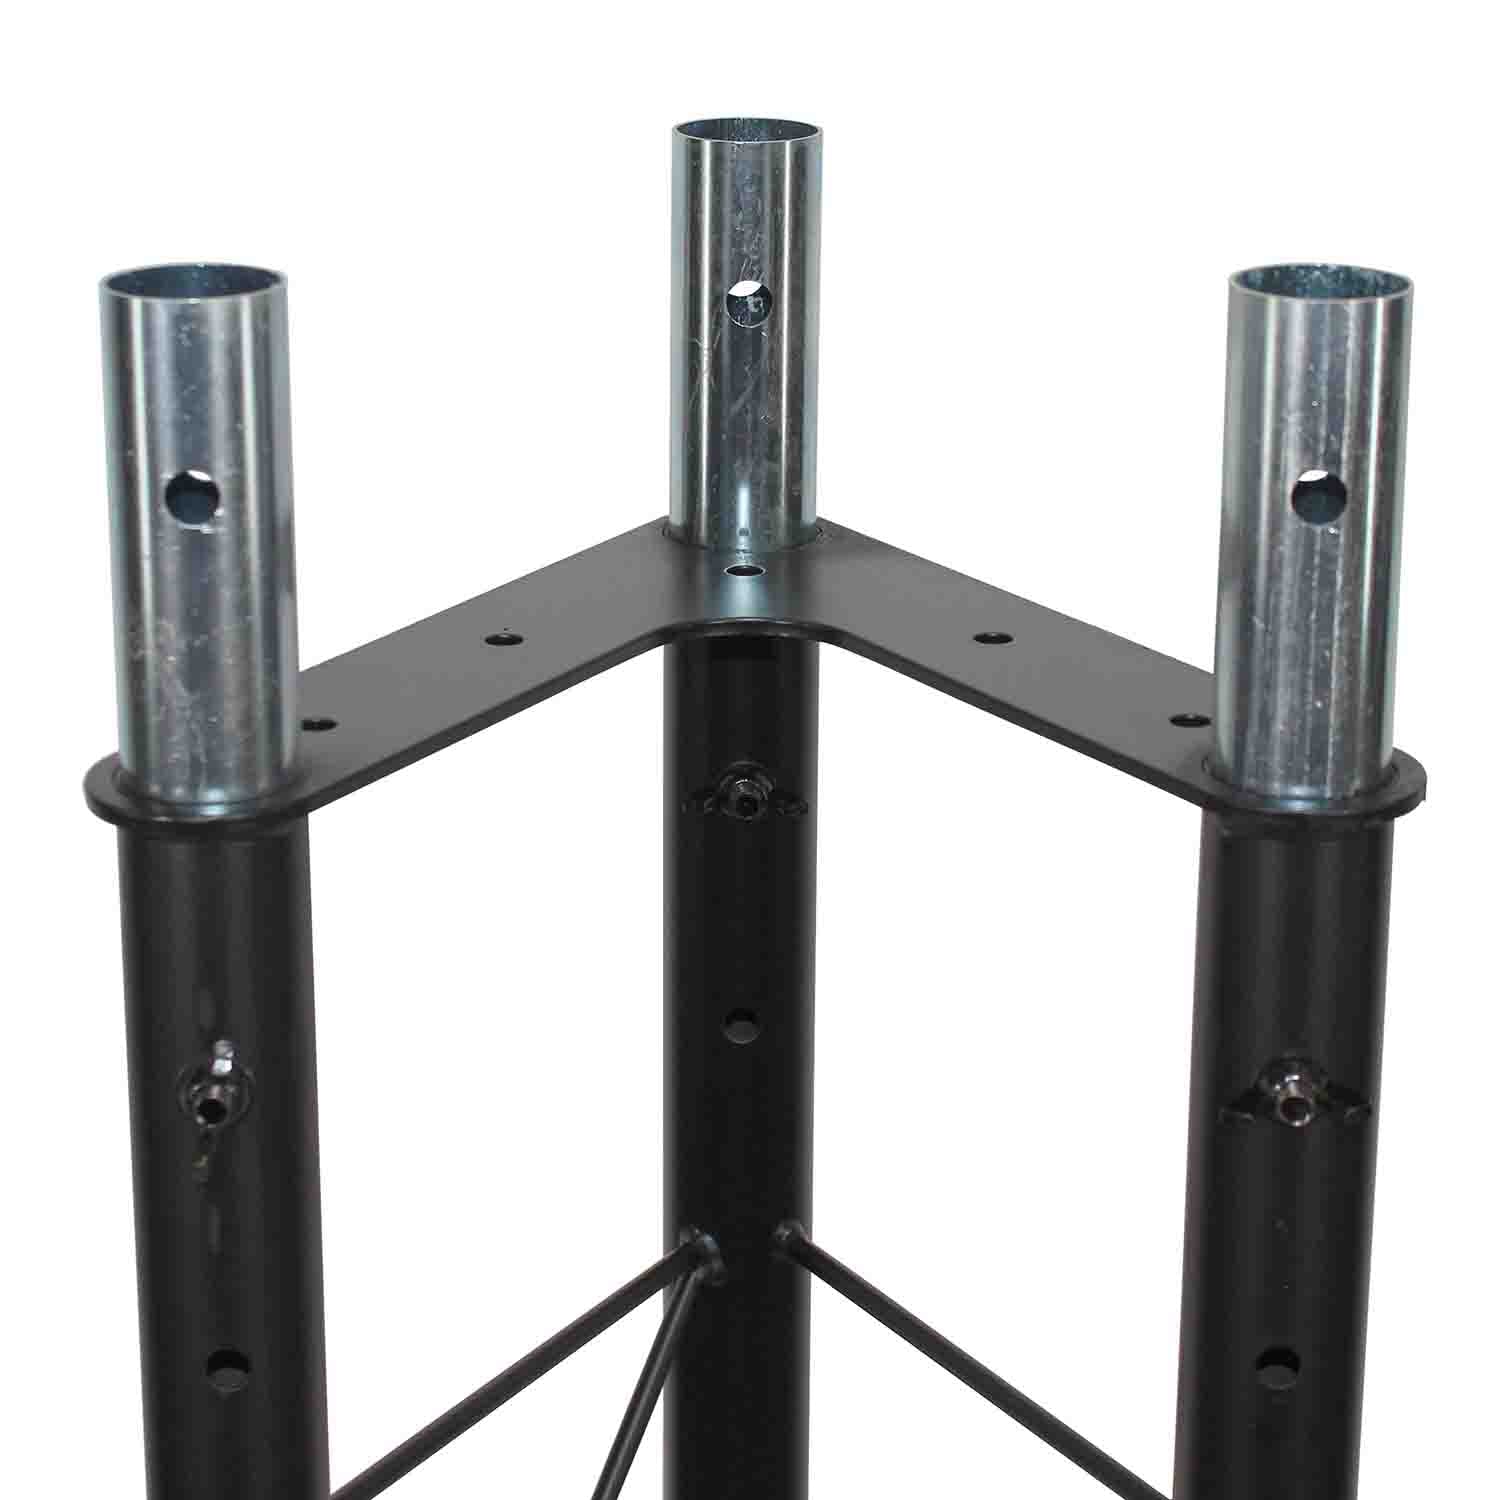 B-Stock: ProX T-LS35VC Truss S/3 57" Triangle Truss for T-LS35VC - Pack of 3 Truss by ProX Cases